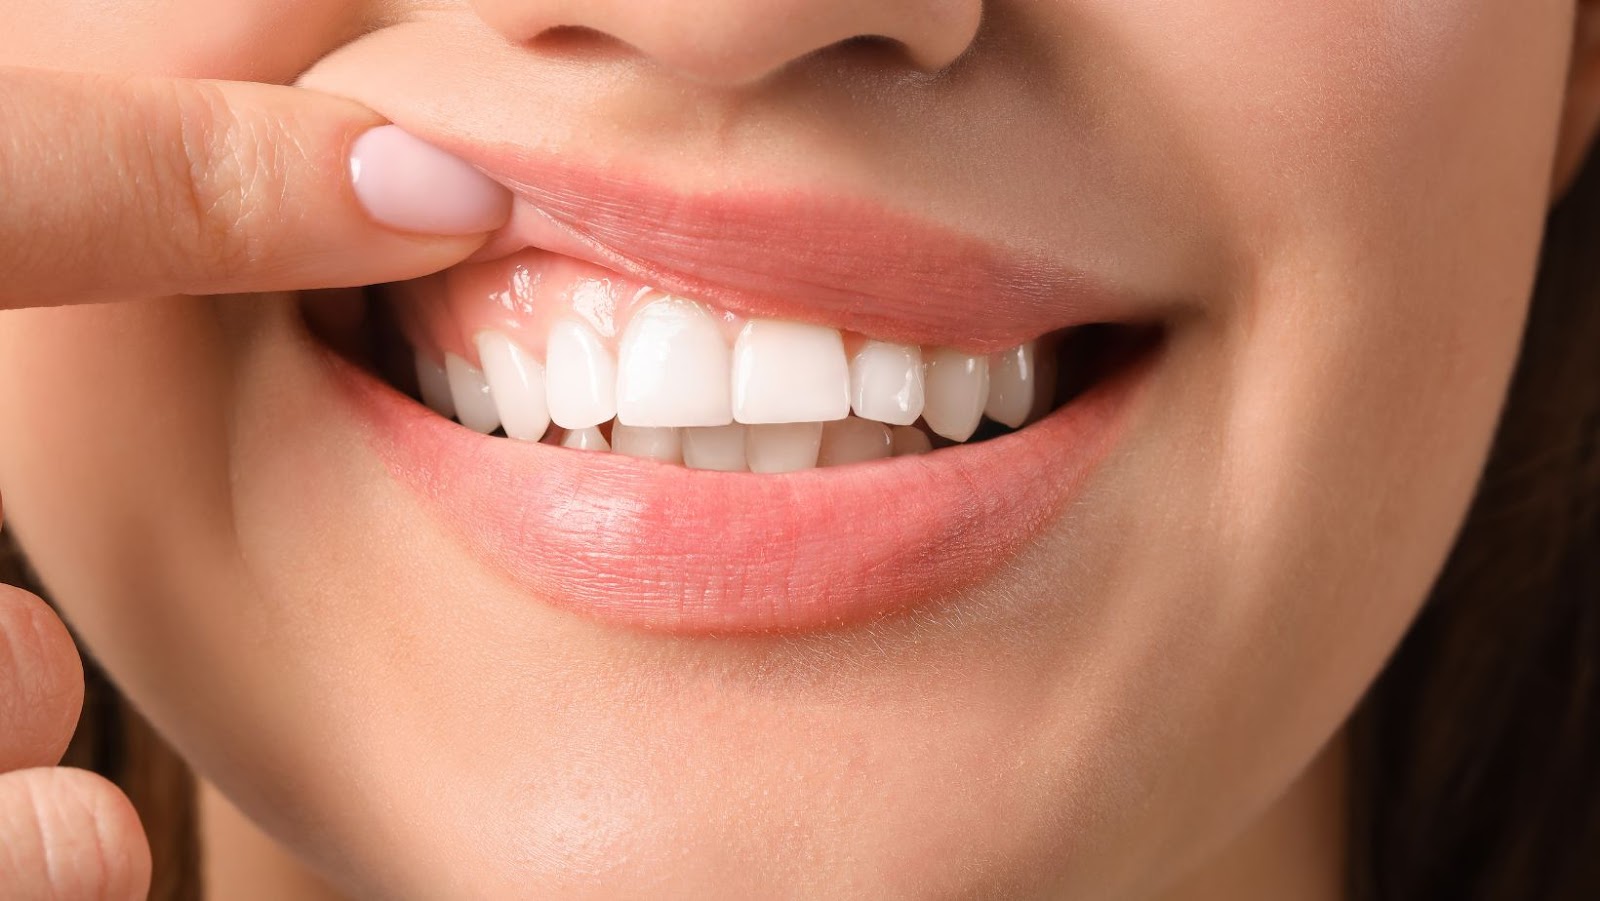 7 Health Benefits of Taking Care of Your Teeth and Gums